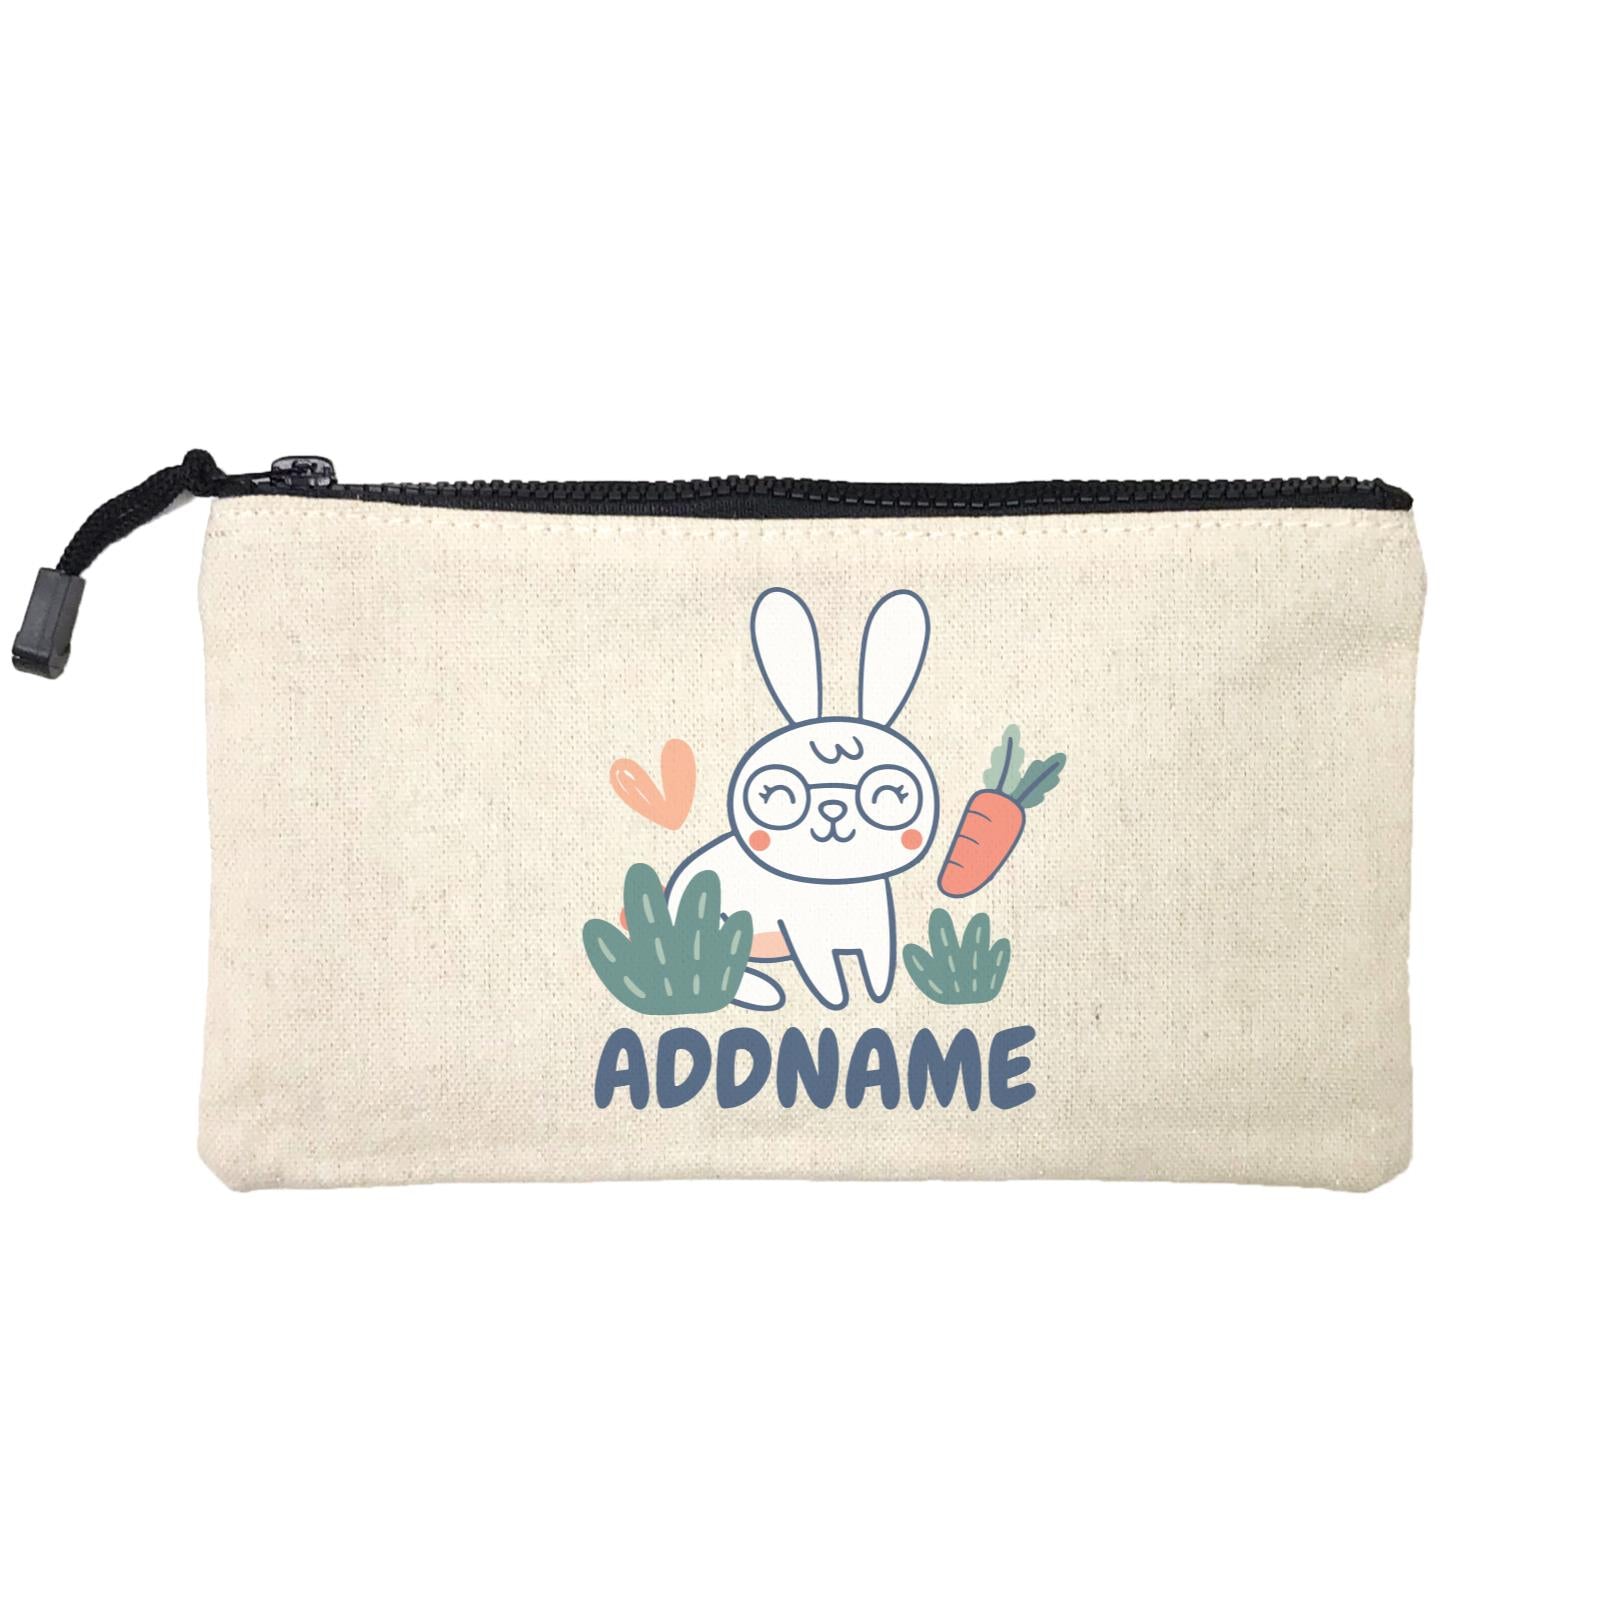 Super Cute Rabbit With Glasses Mini Accessories Stationery Pouch